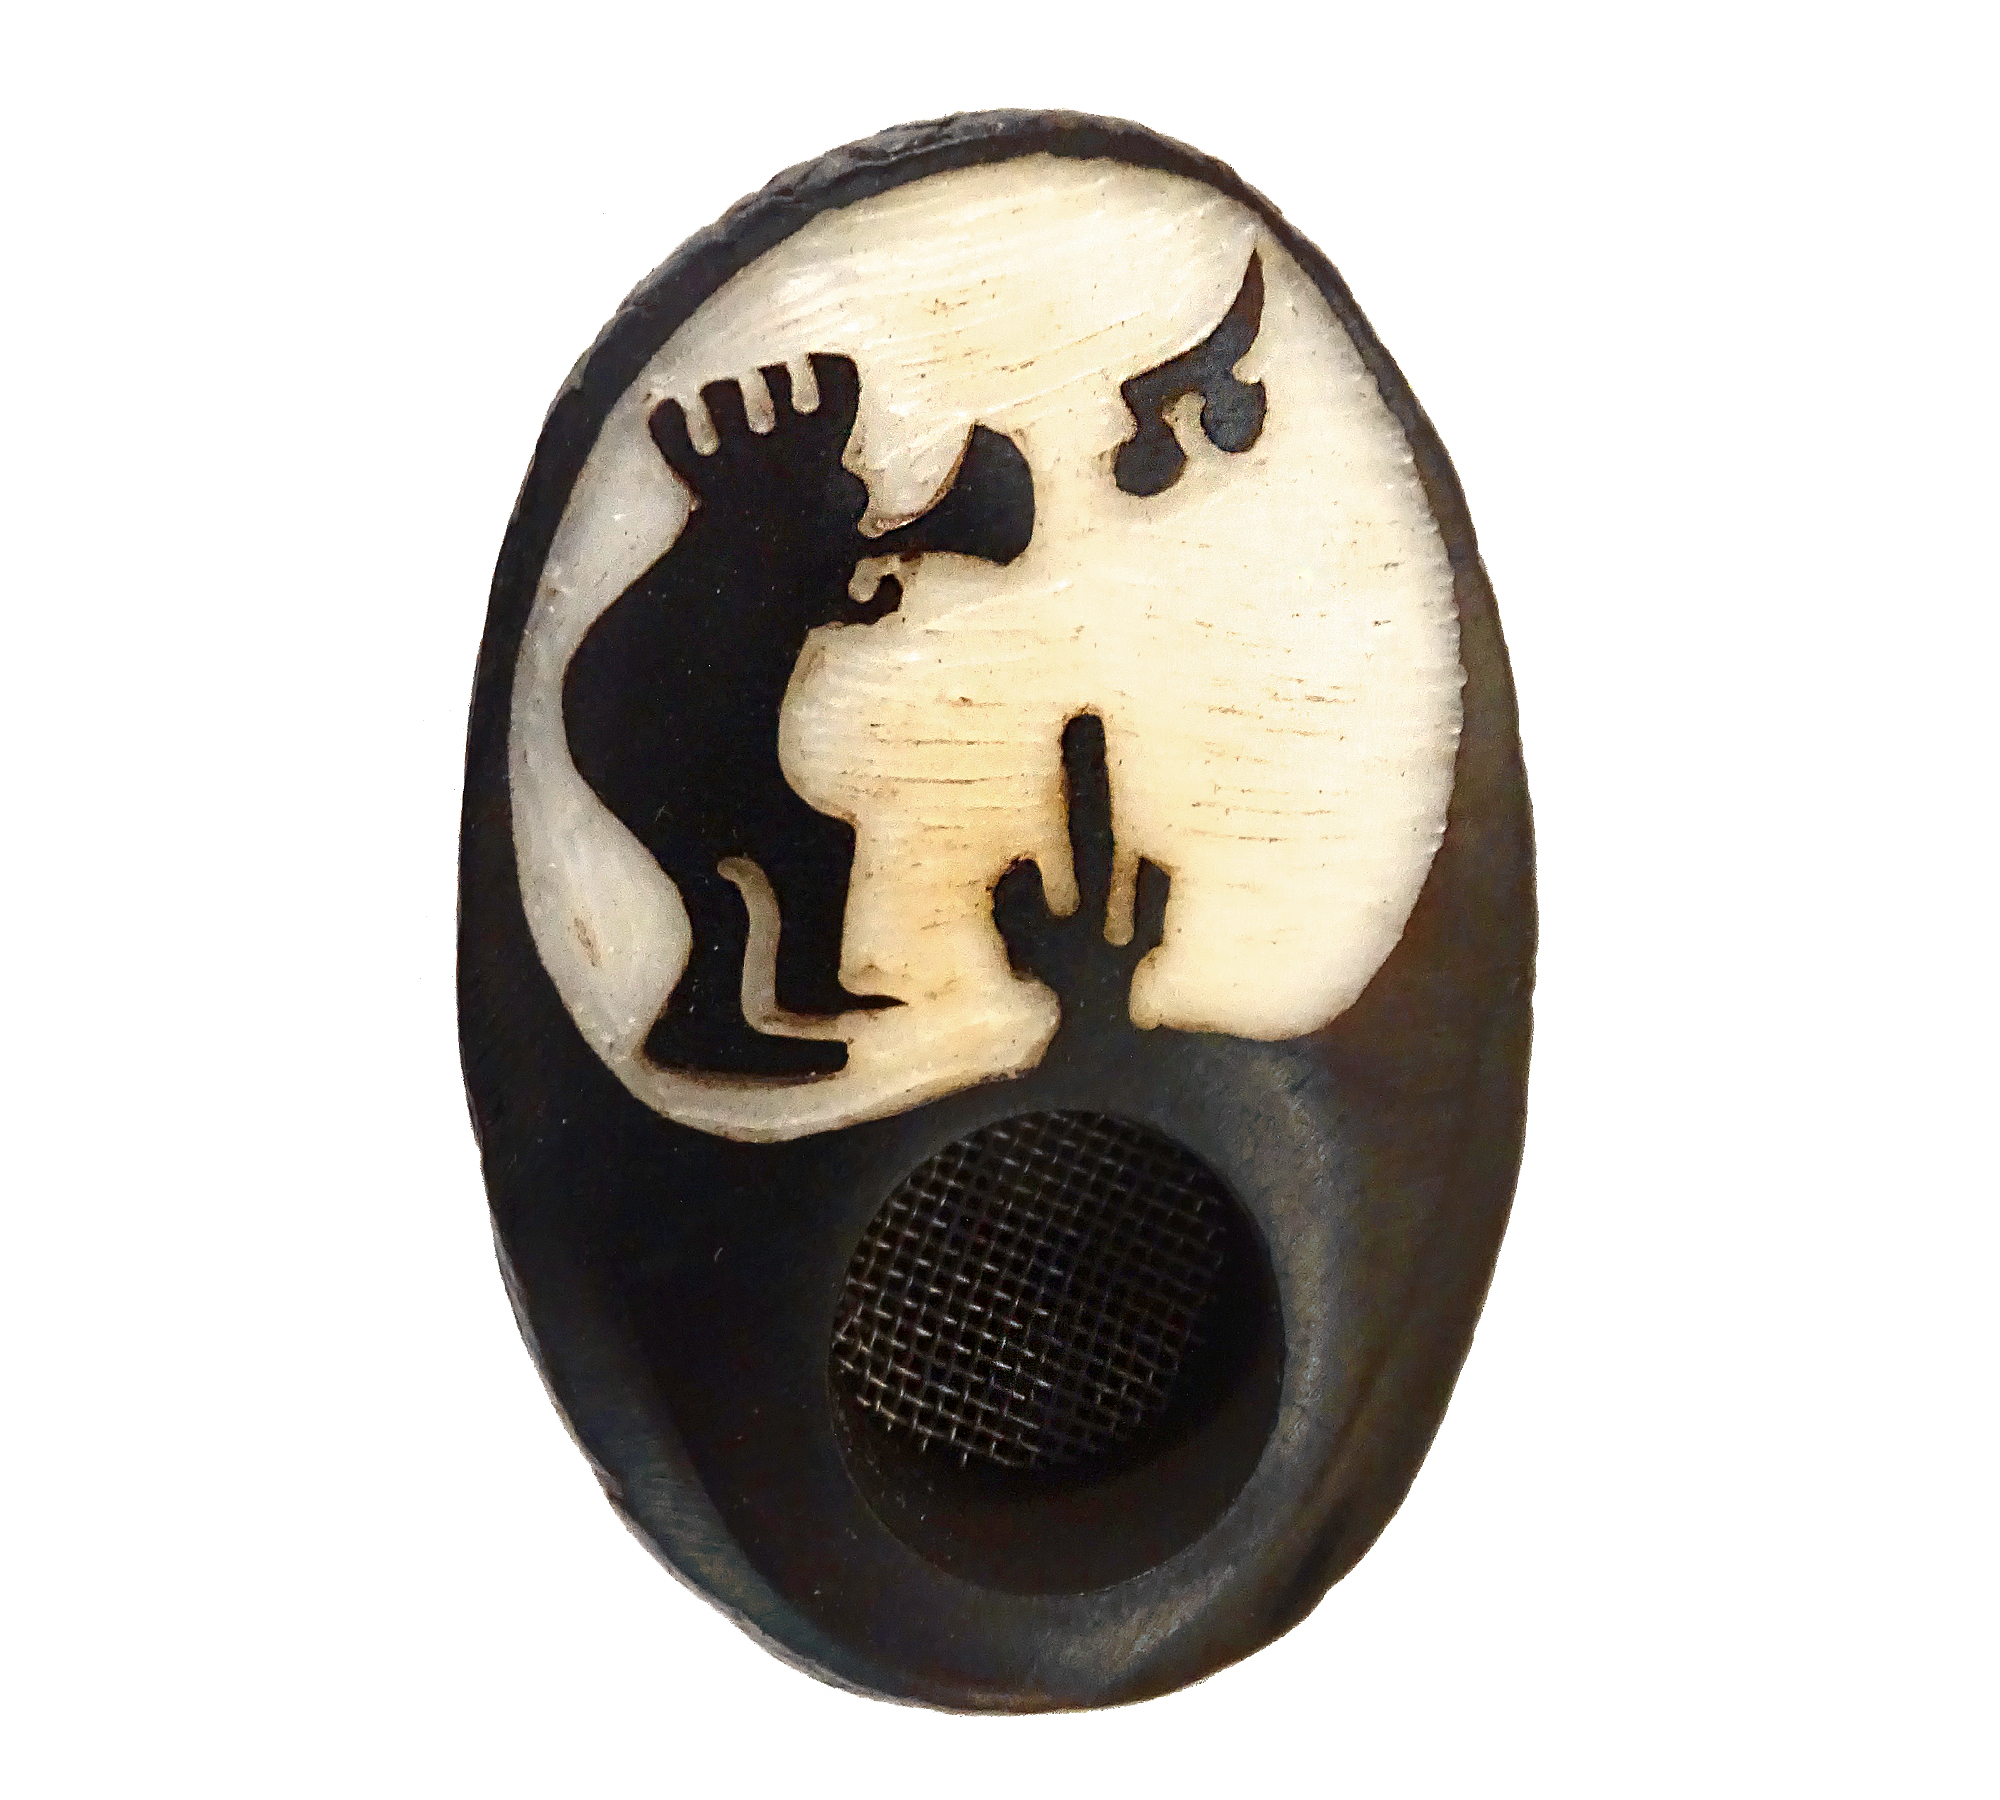 Handcarved tobacco smoking mini round natural tagua nut hand pipe bowl of a kokopelli deity playing the flute.